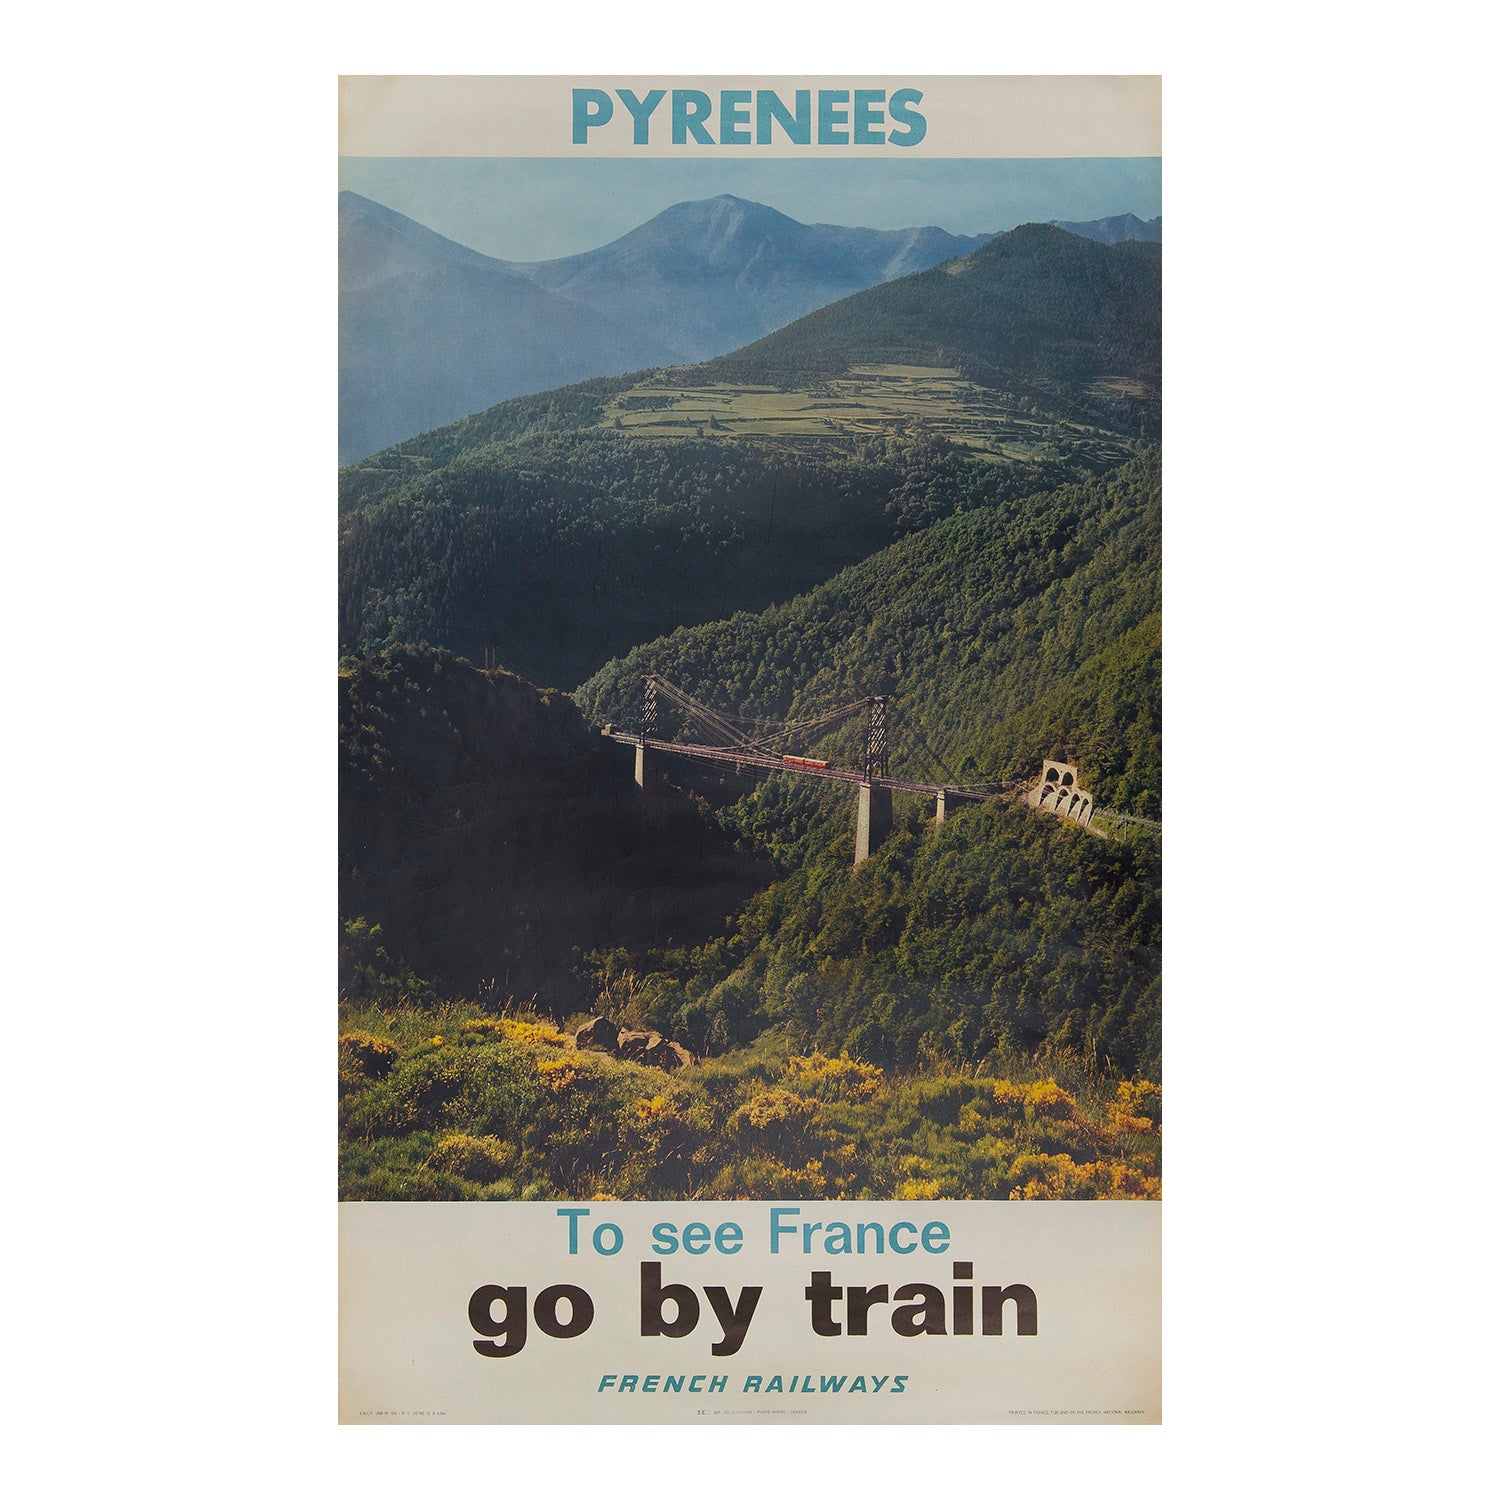 Pyrenees. To see France go by train. French Railways